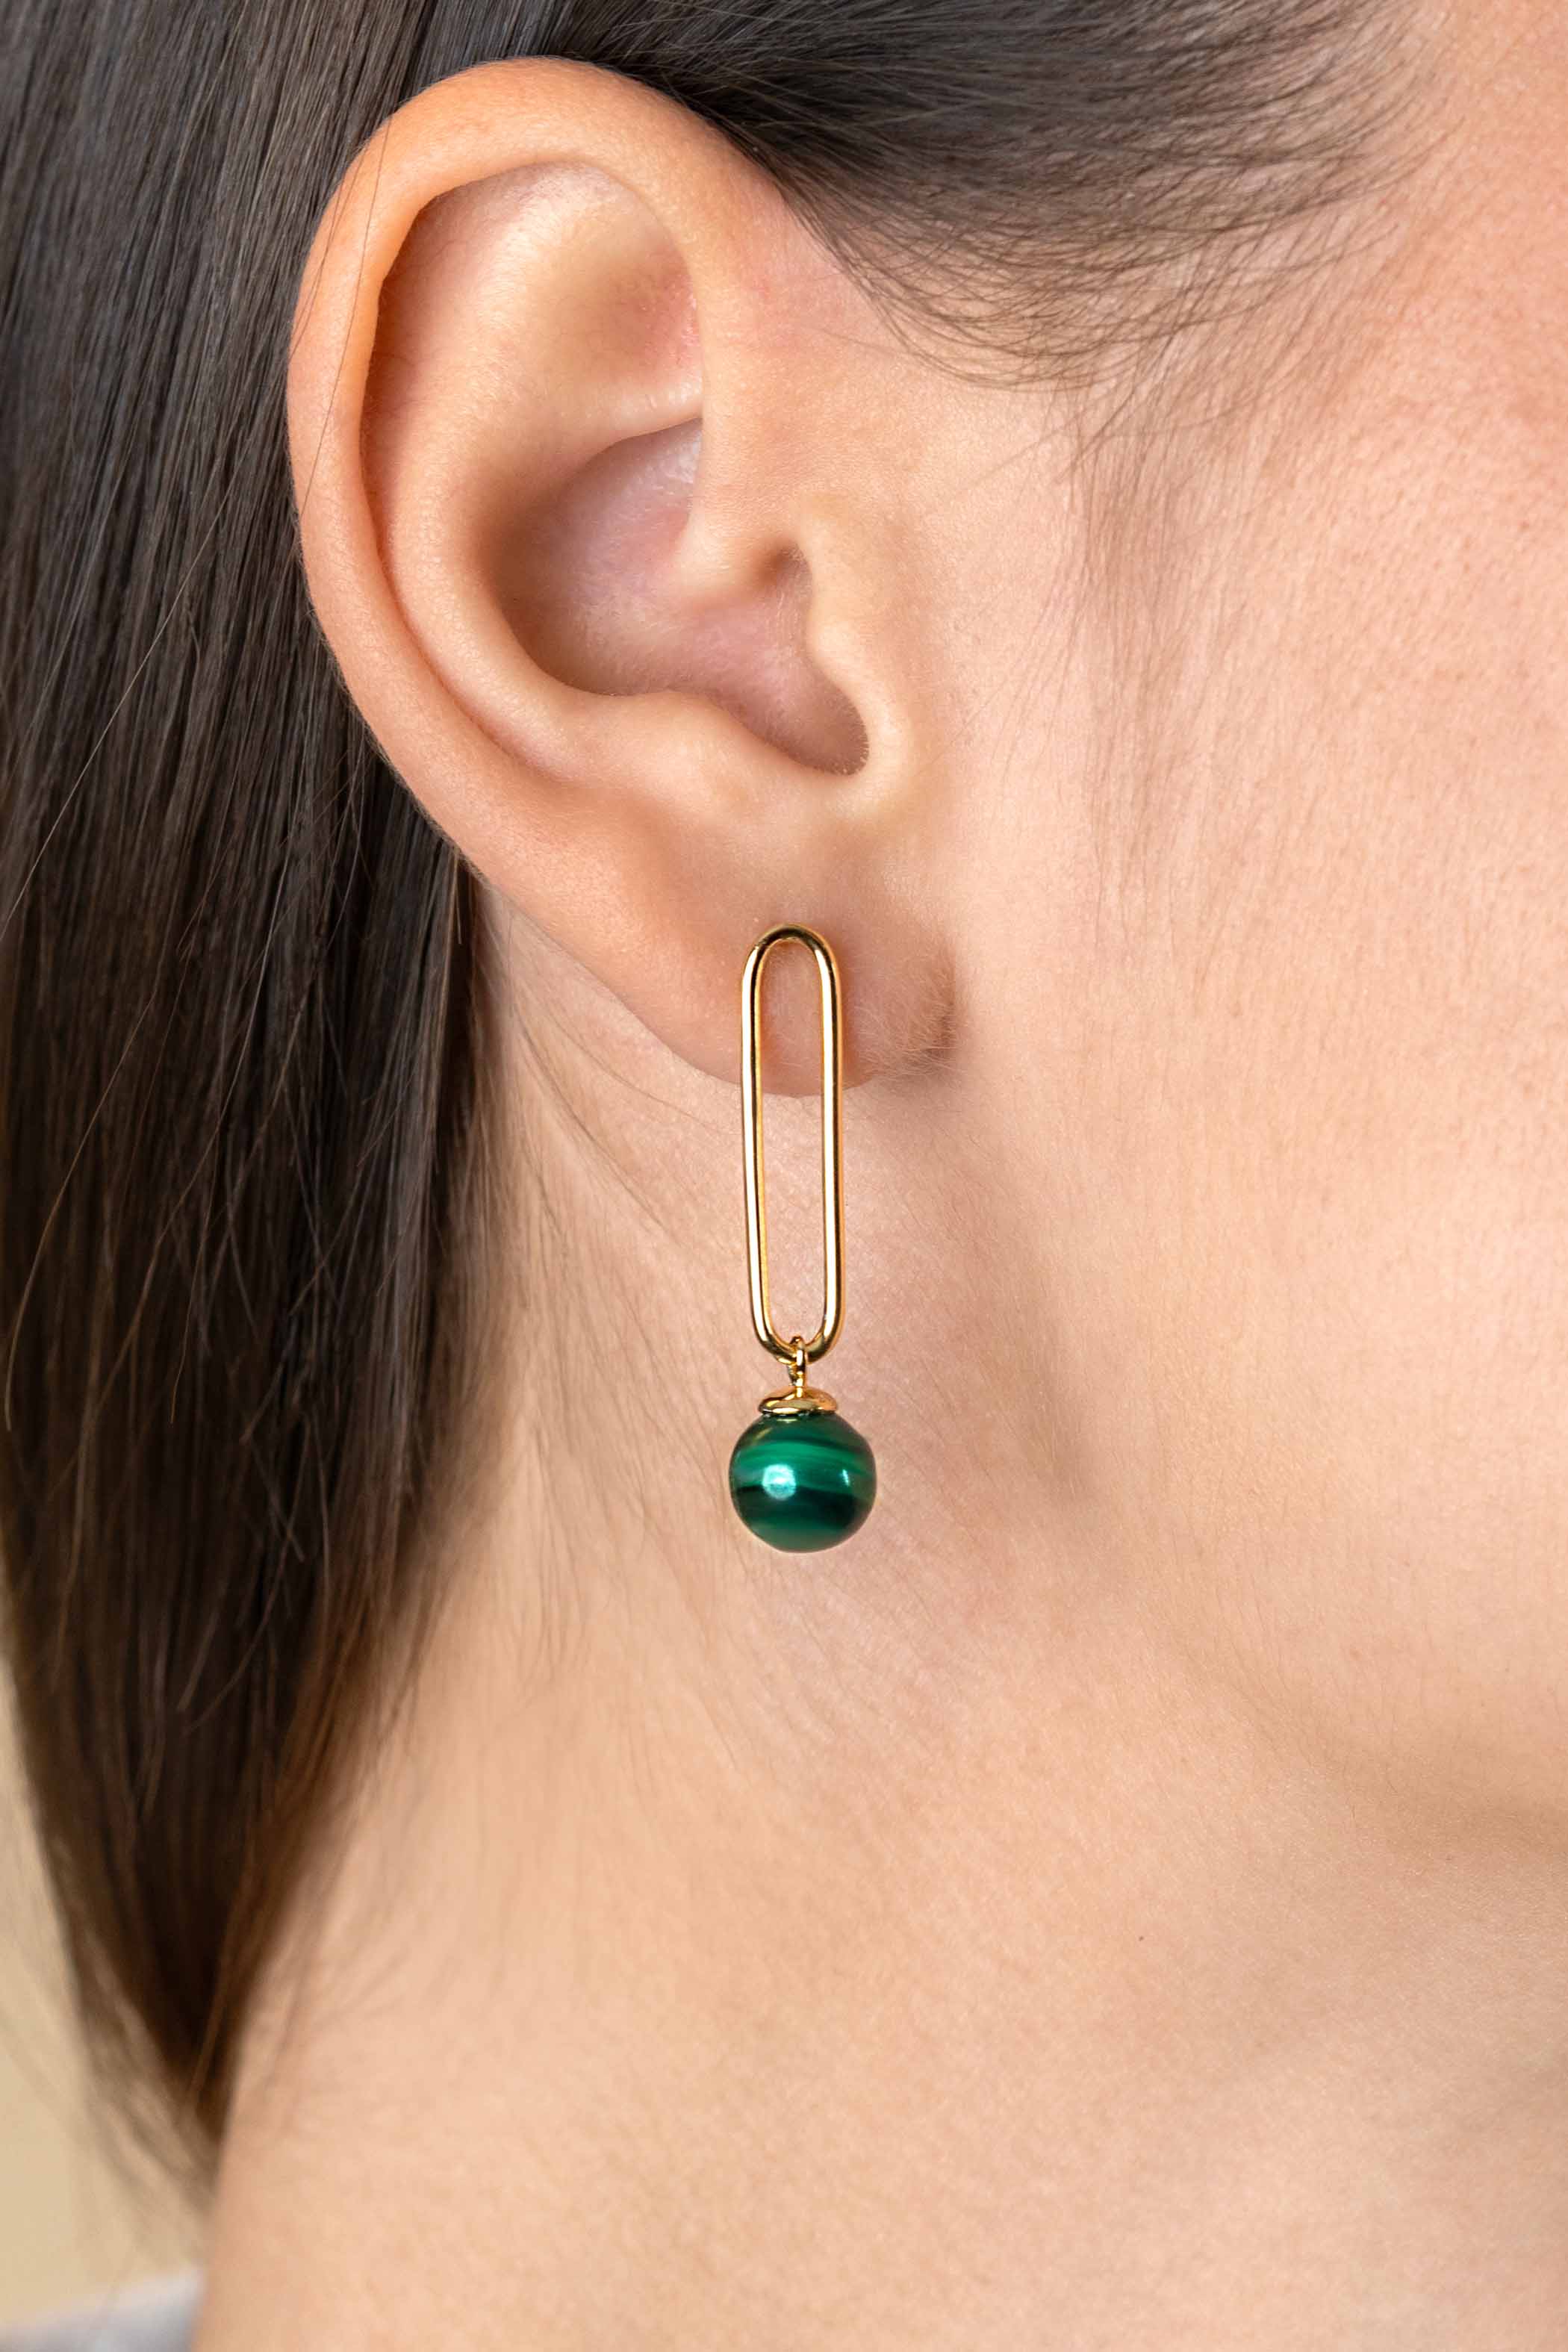 35mm ZINZI Gold Plated Sterling Silver Earrings Long Paperclip Chain and Green Cat's Eye Bead ZIO2420